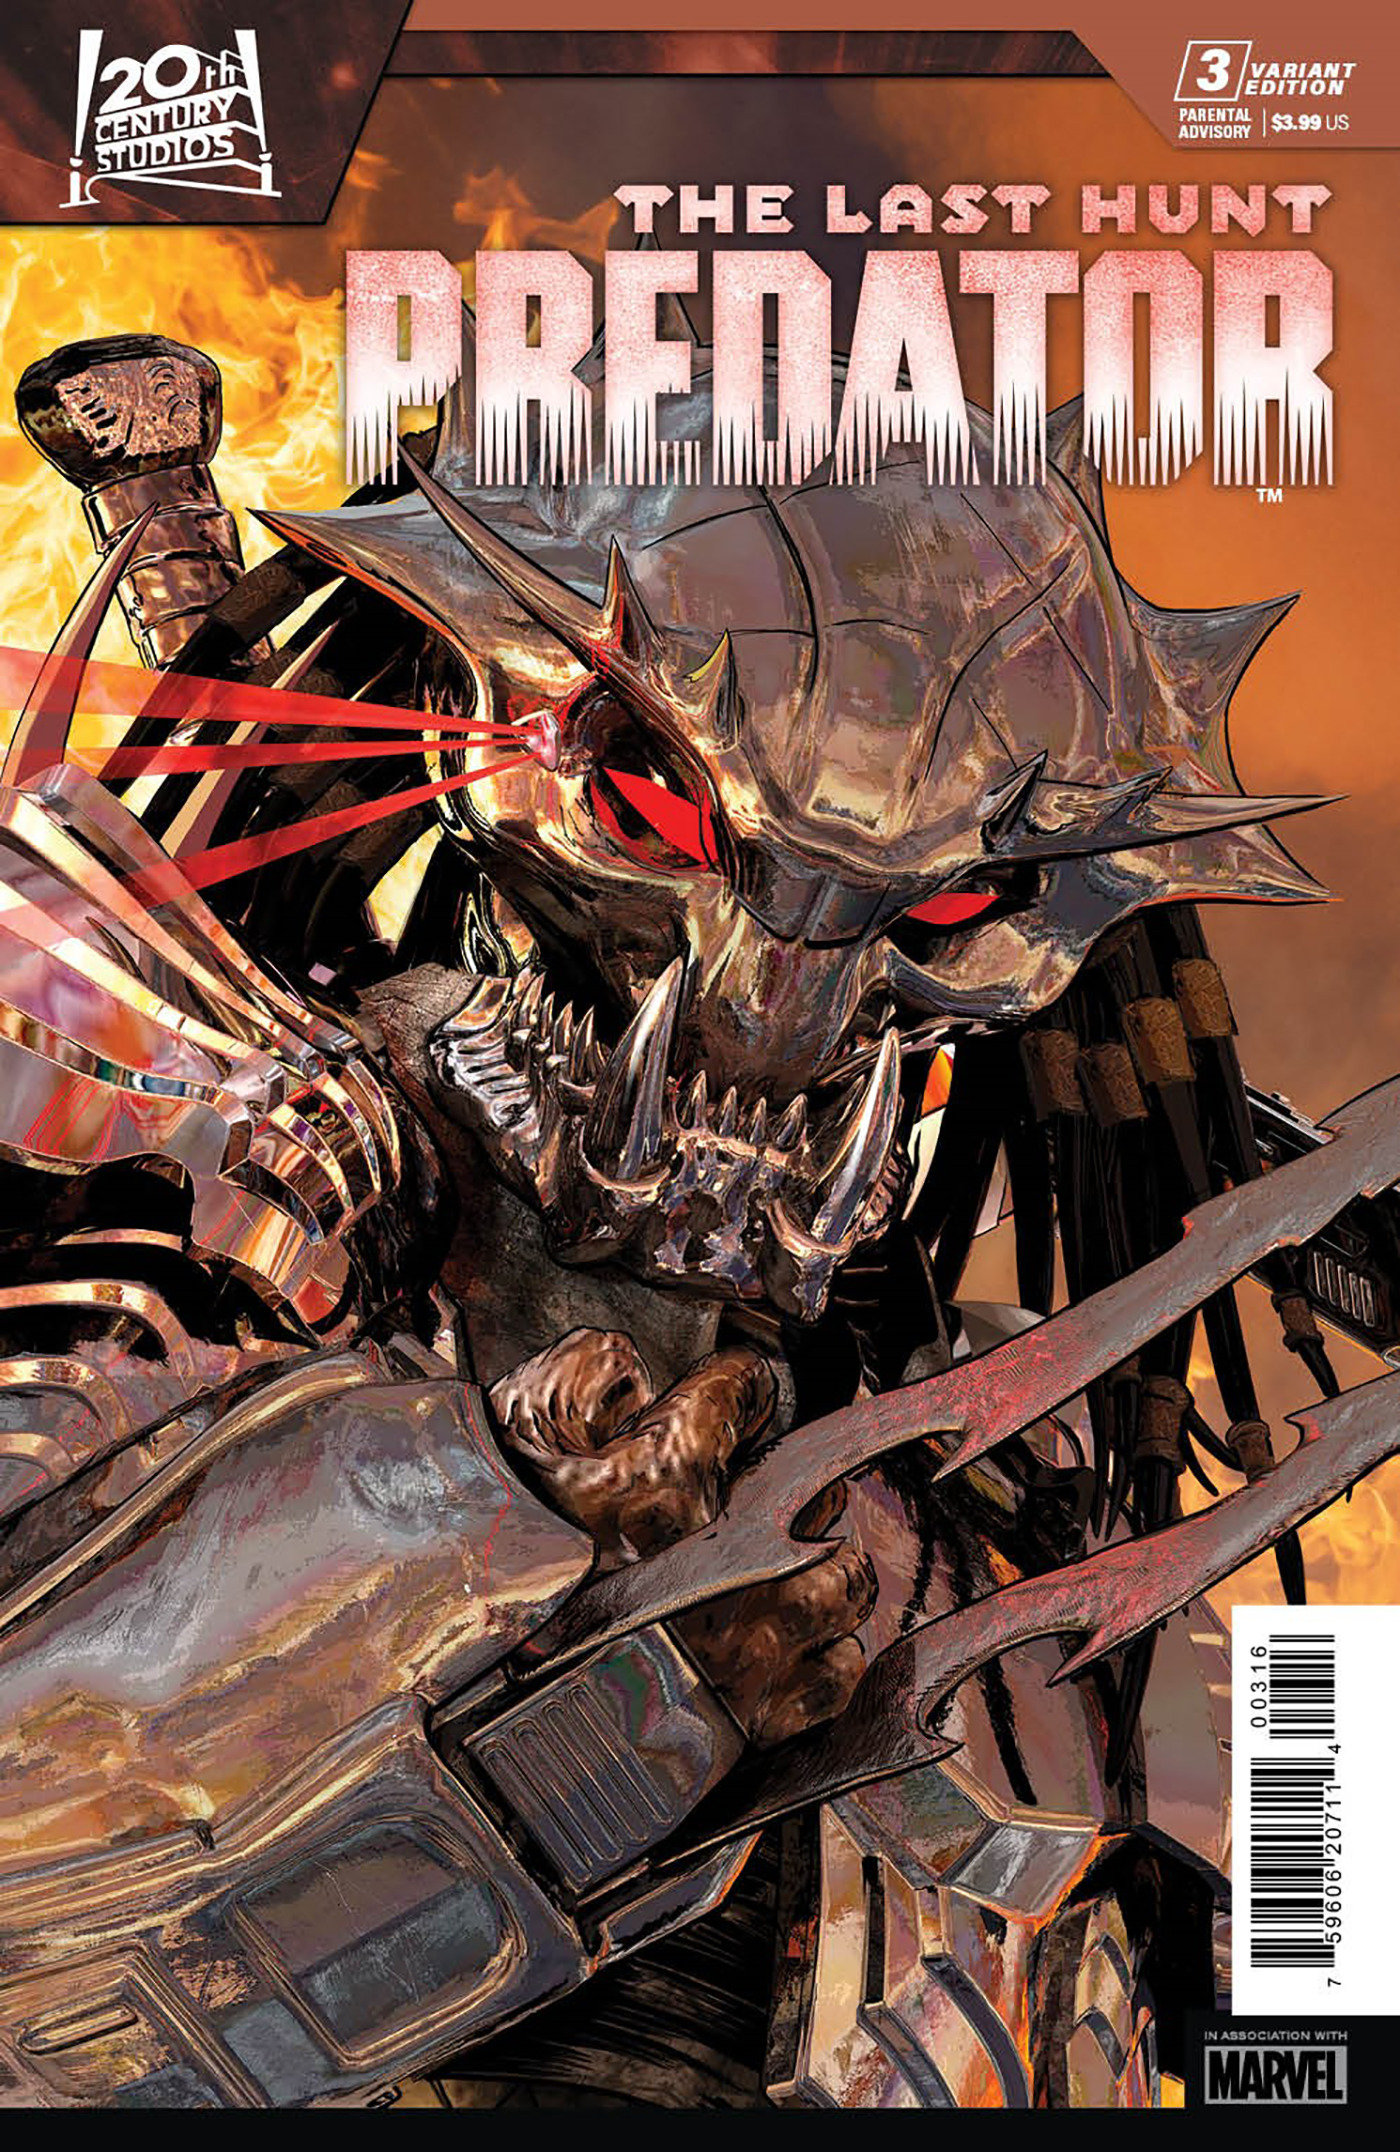 Predator: The Last Hunt #3 Mike Mayhew Variant 1 for 25 Incentive